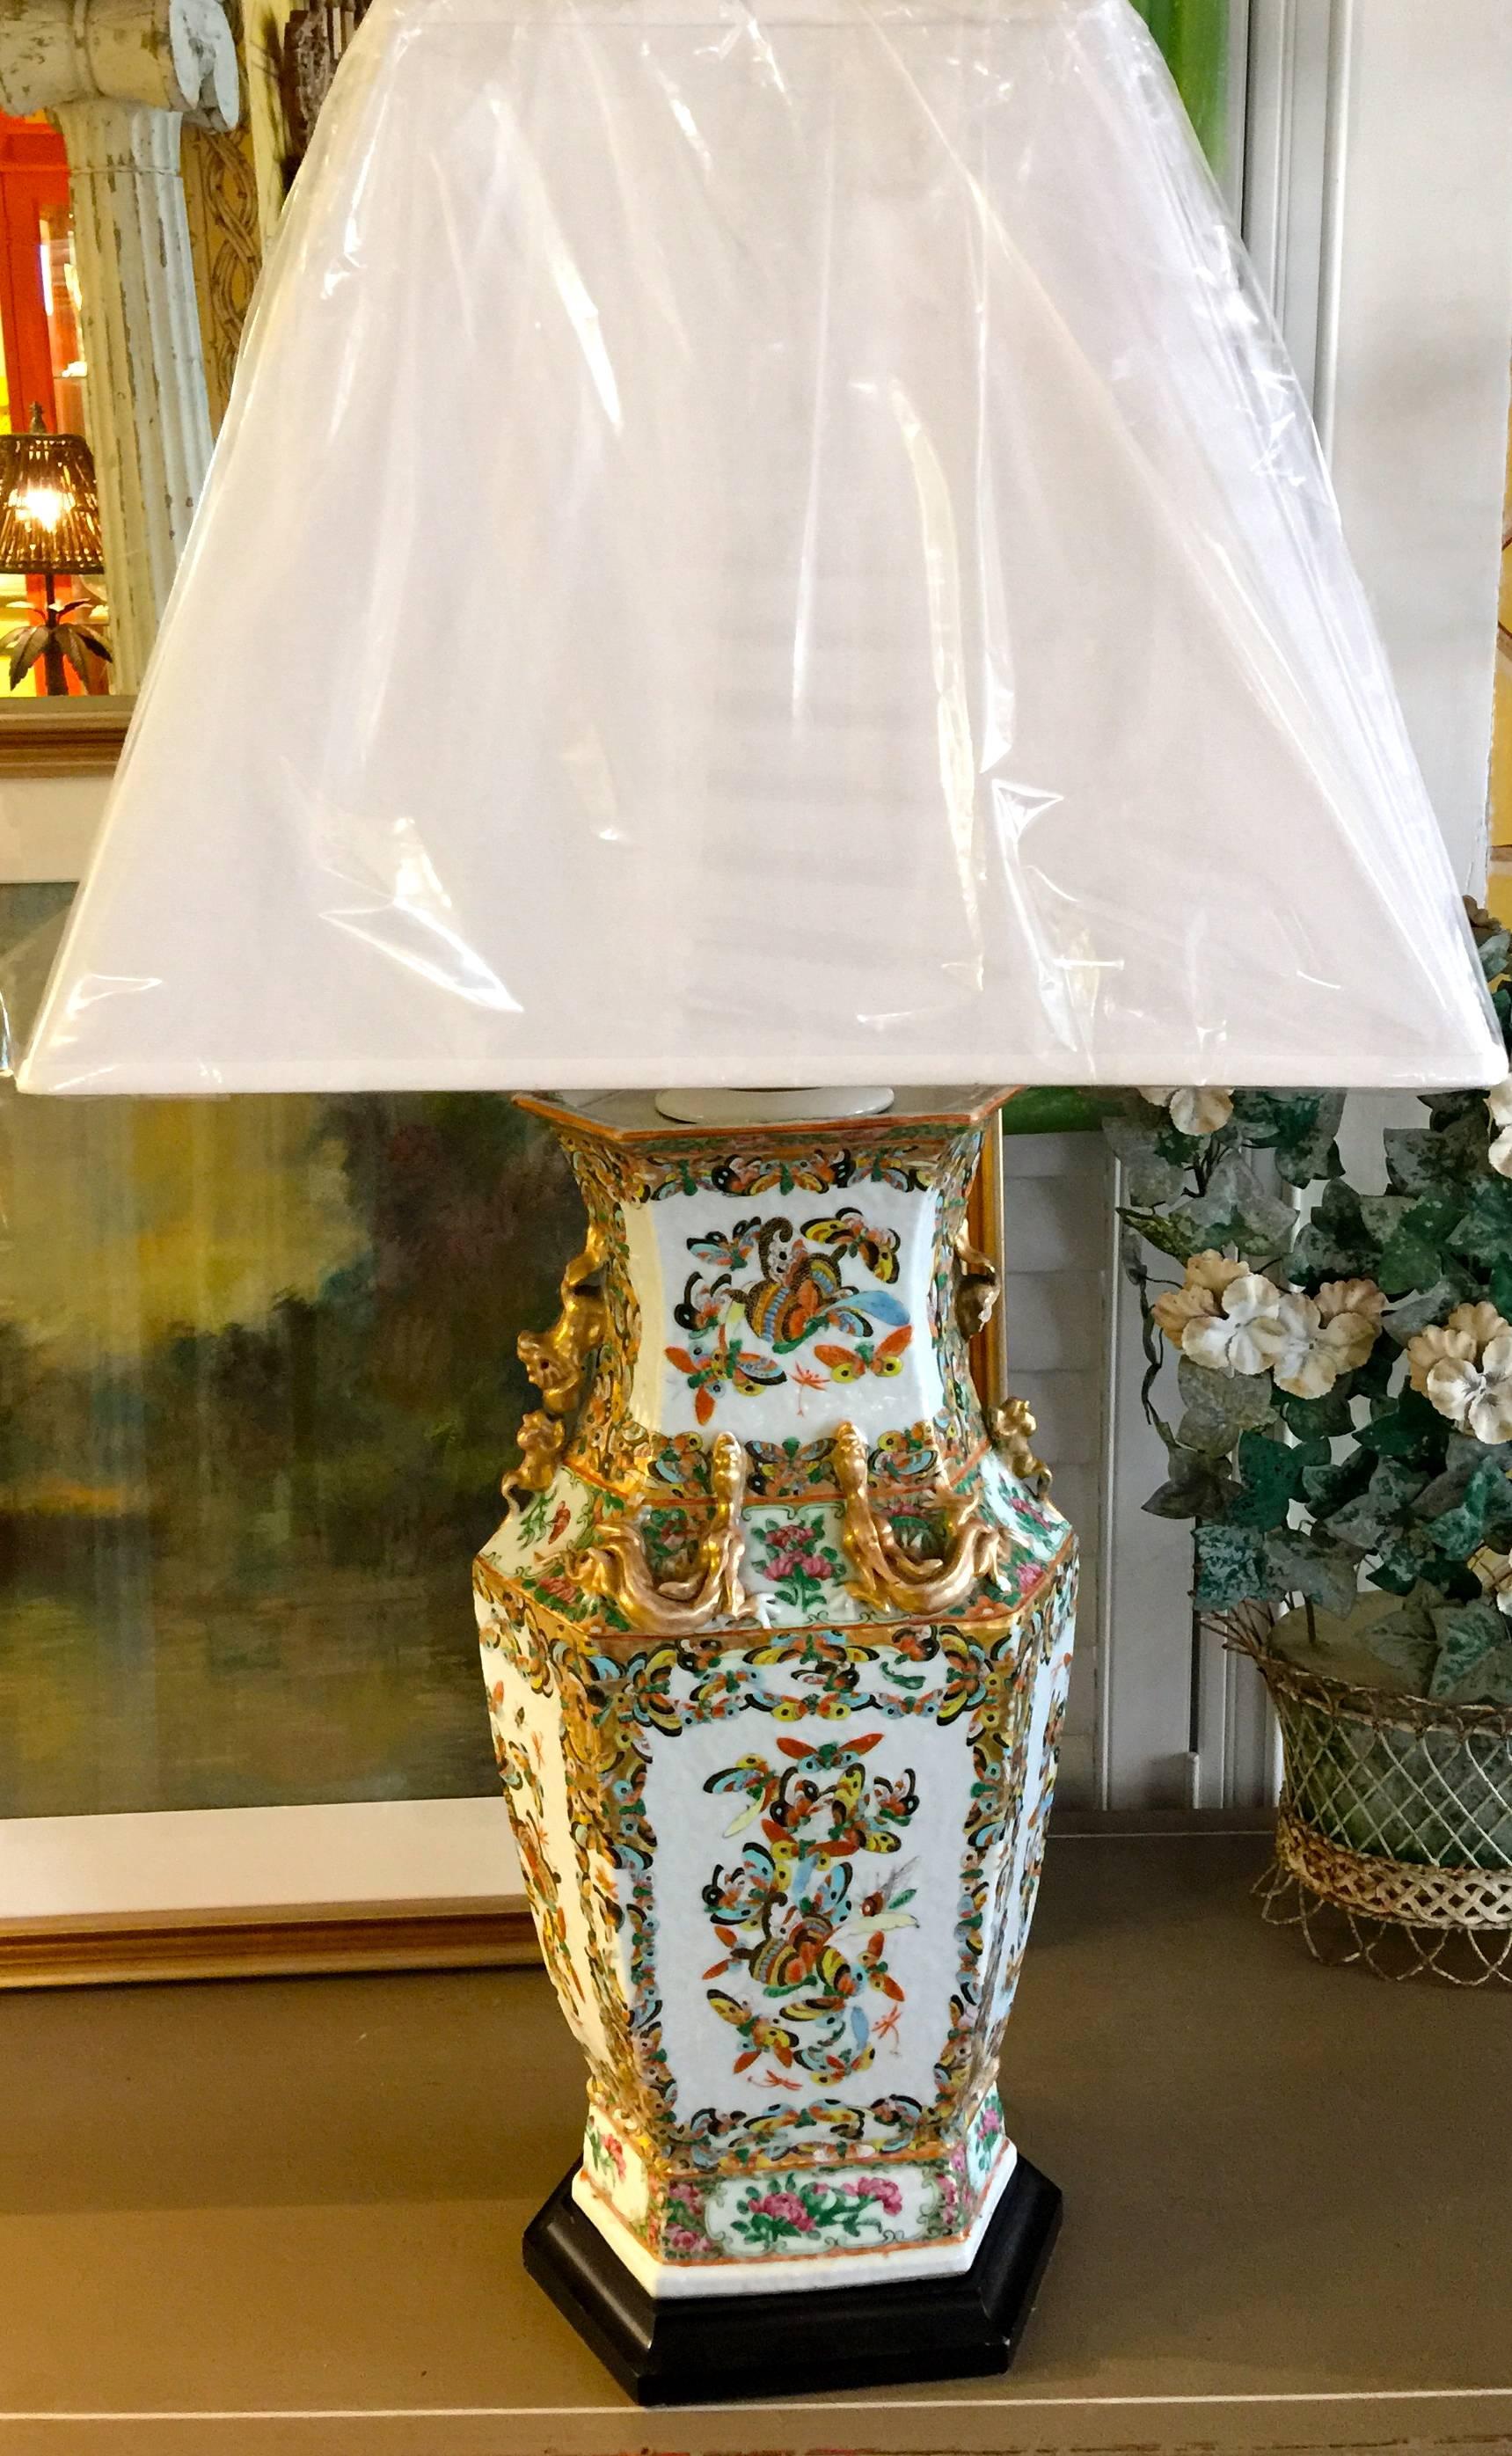 Pair of 18th century Chinese vases as lamps.